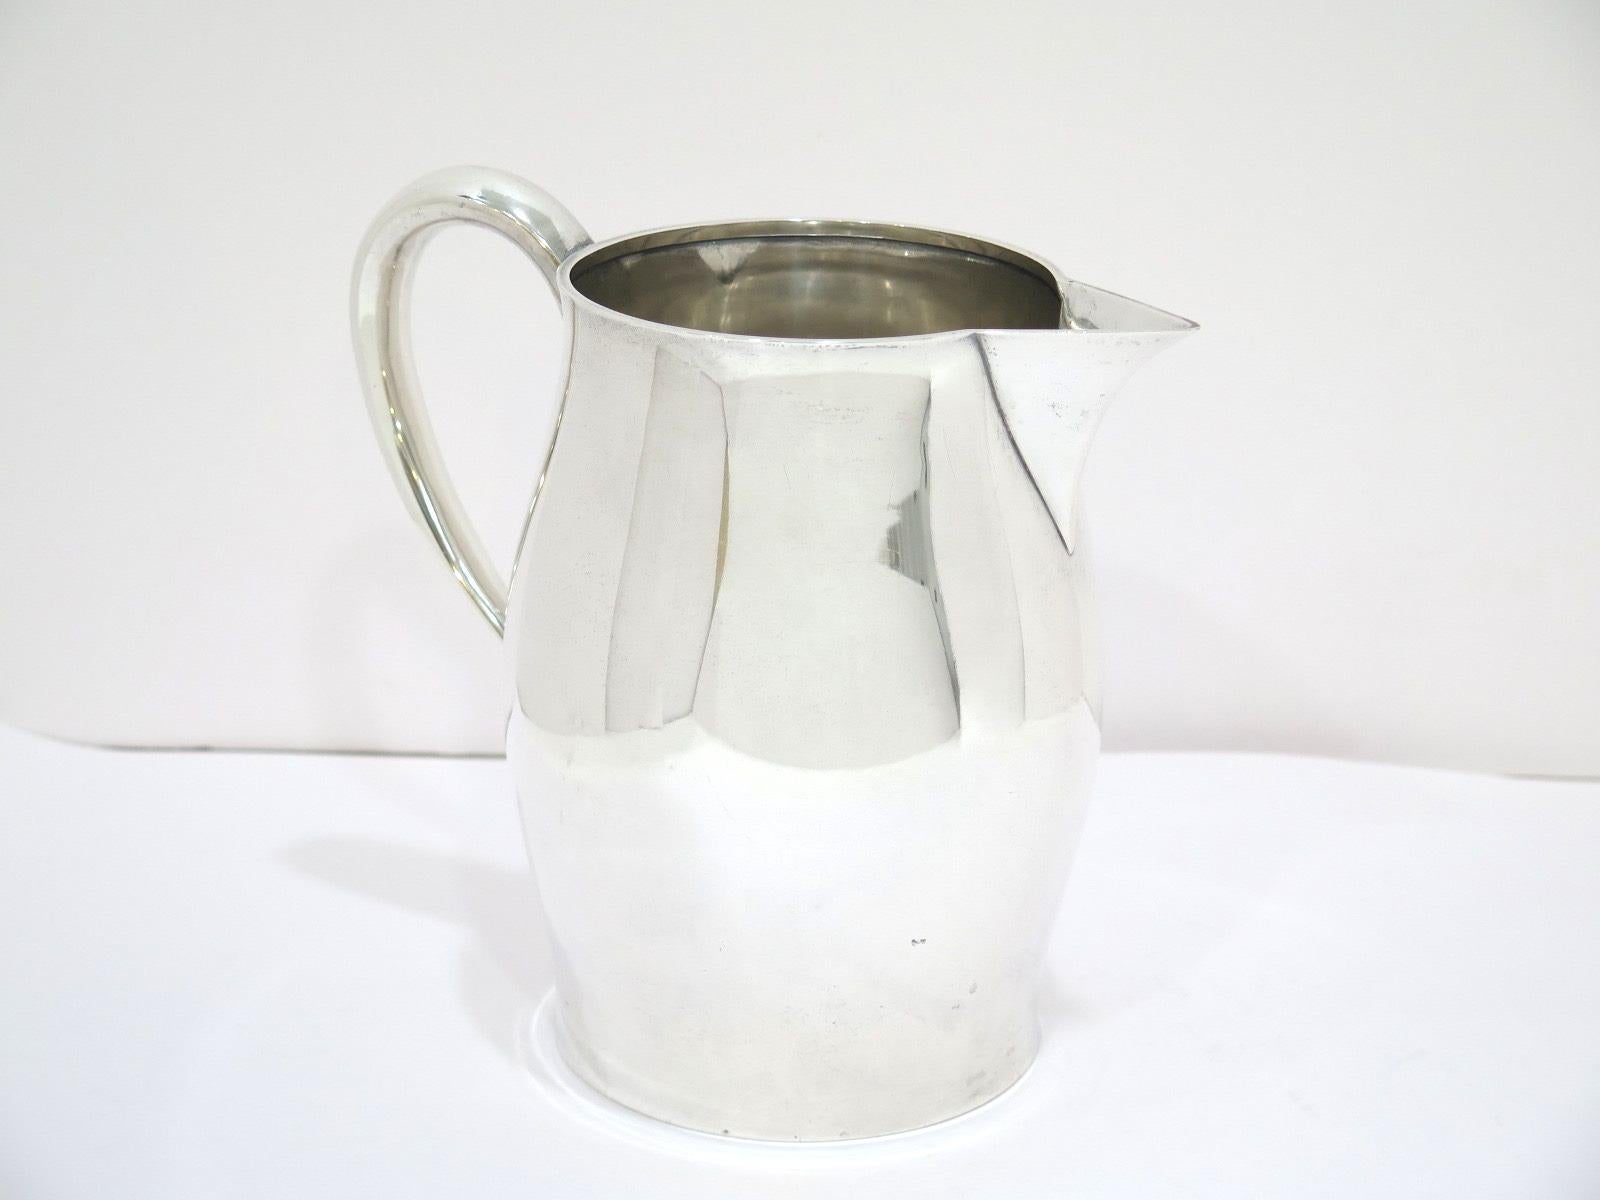 Dimensions (H x L x D): 7 7/8 x 8.25 x 5.5 in
Weight: 23.5 toz
This pitcher was not made by Paul Revere but its pattern is called 